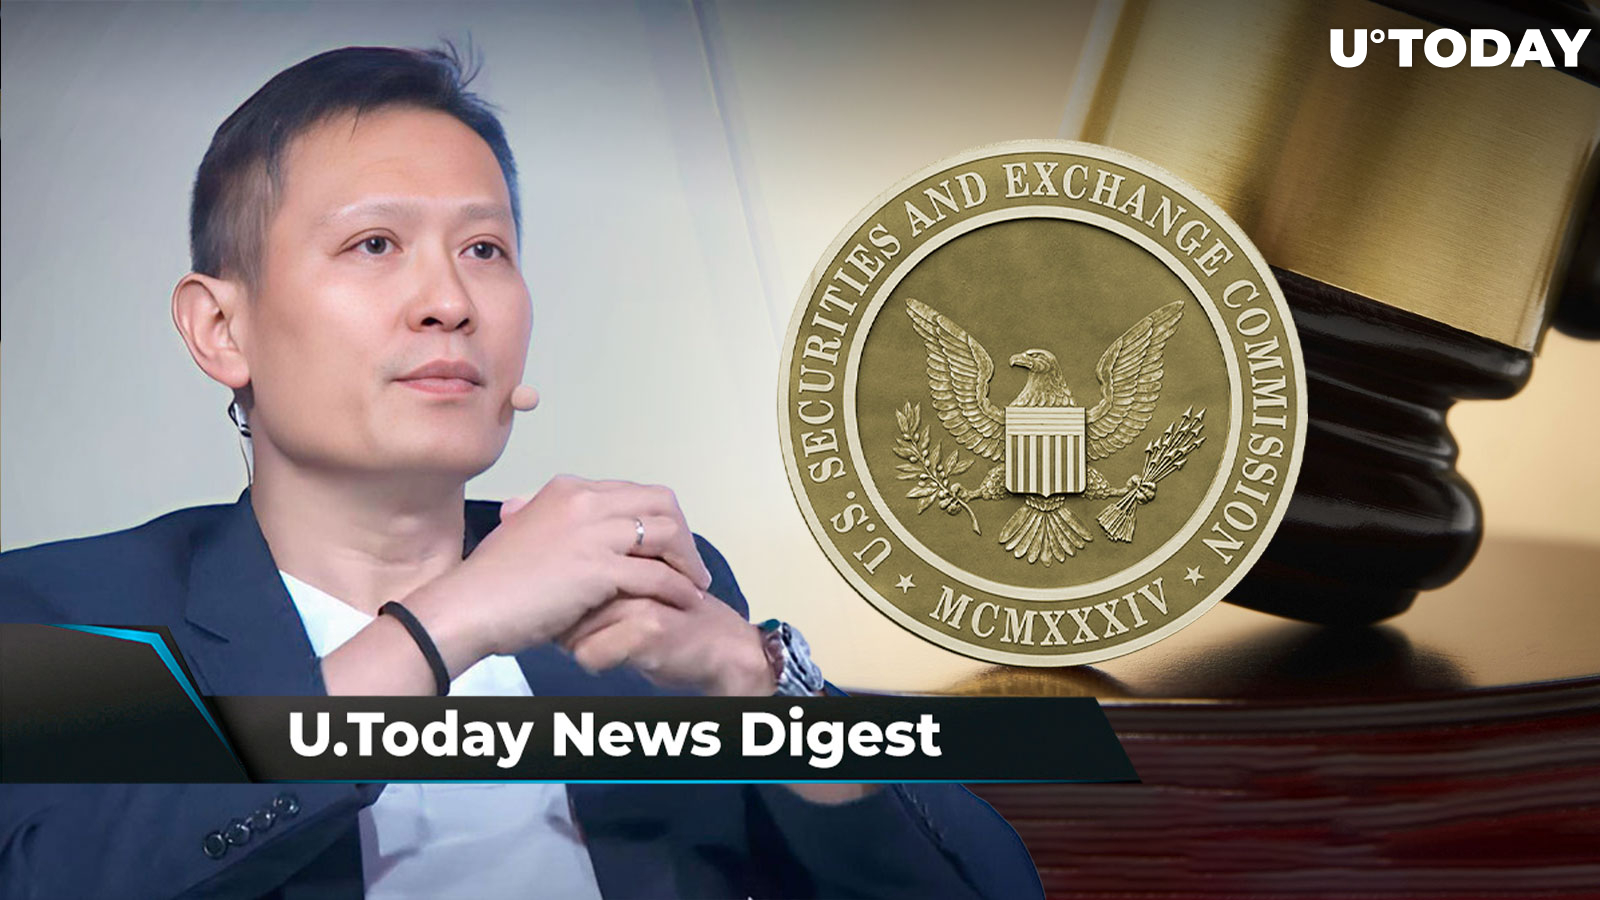 SEC Announces Private Meeting, New Binance CEO Addresses $4.3 Billion Fine; SHIB, BTC, ETH Offer New Way to Pay Mortgage: Crypto News Digest by U.Today